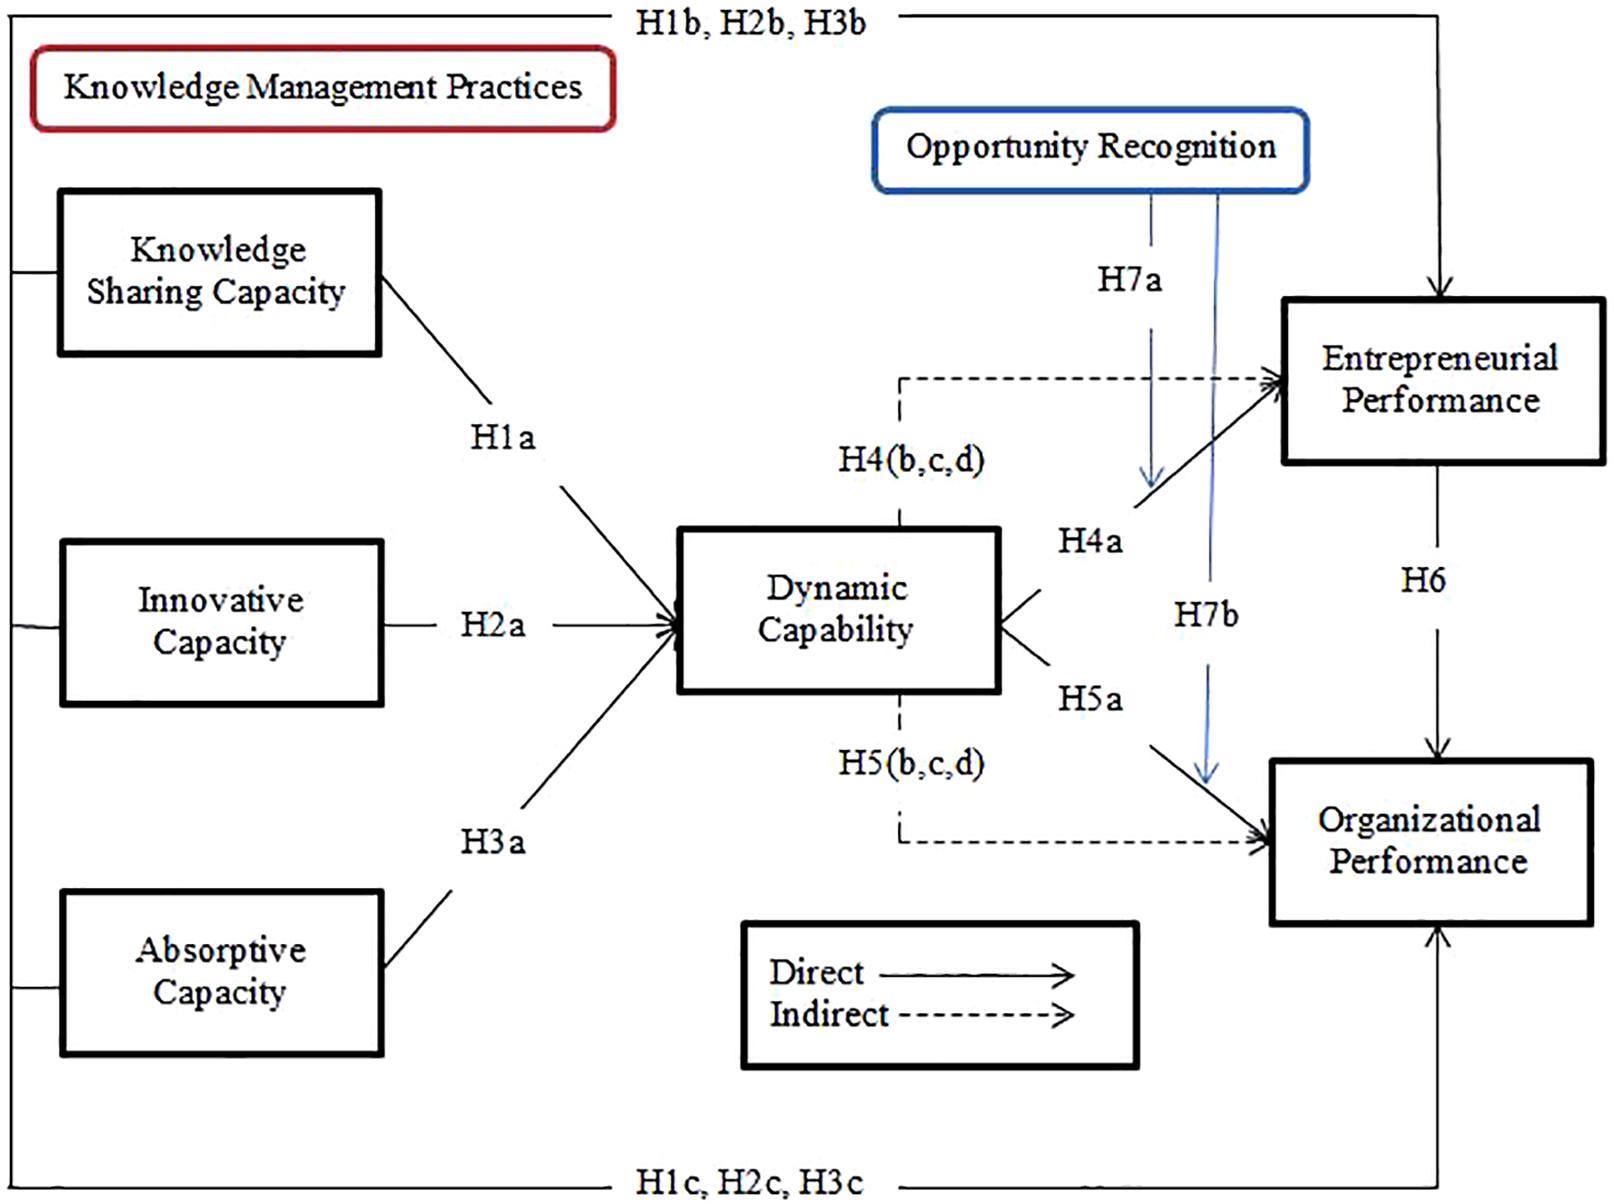 Frontiers Influence Of Knowledge Management Practices On Entrepreneurial And Organizational Performance A Mediated Moderation Model Psychology